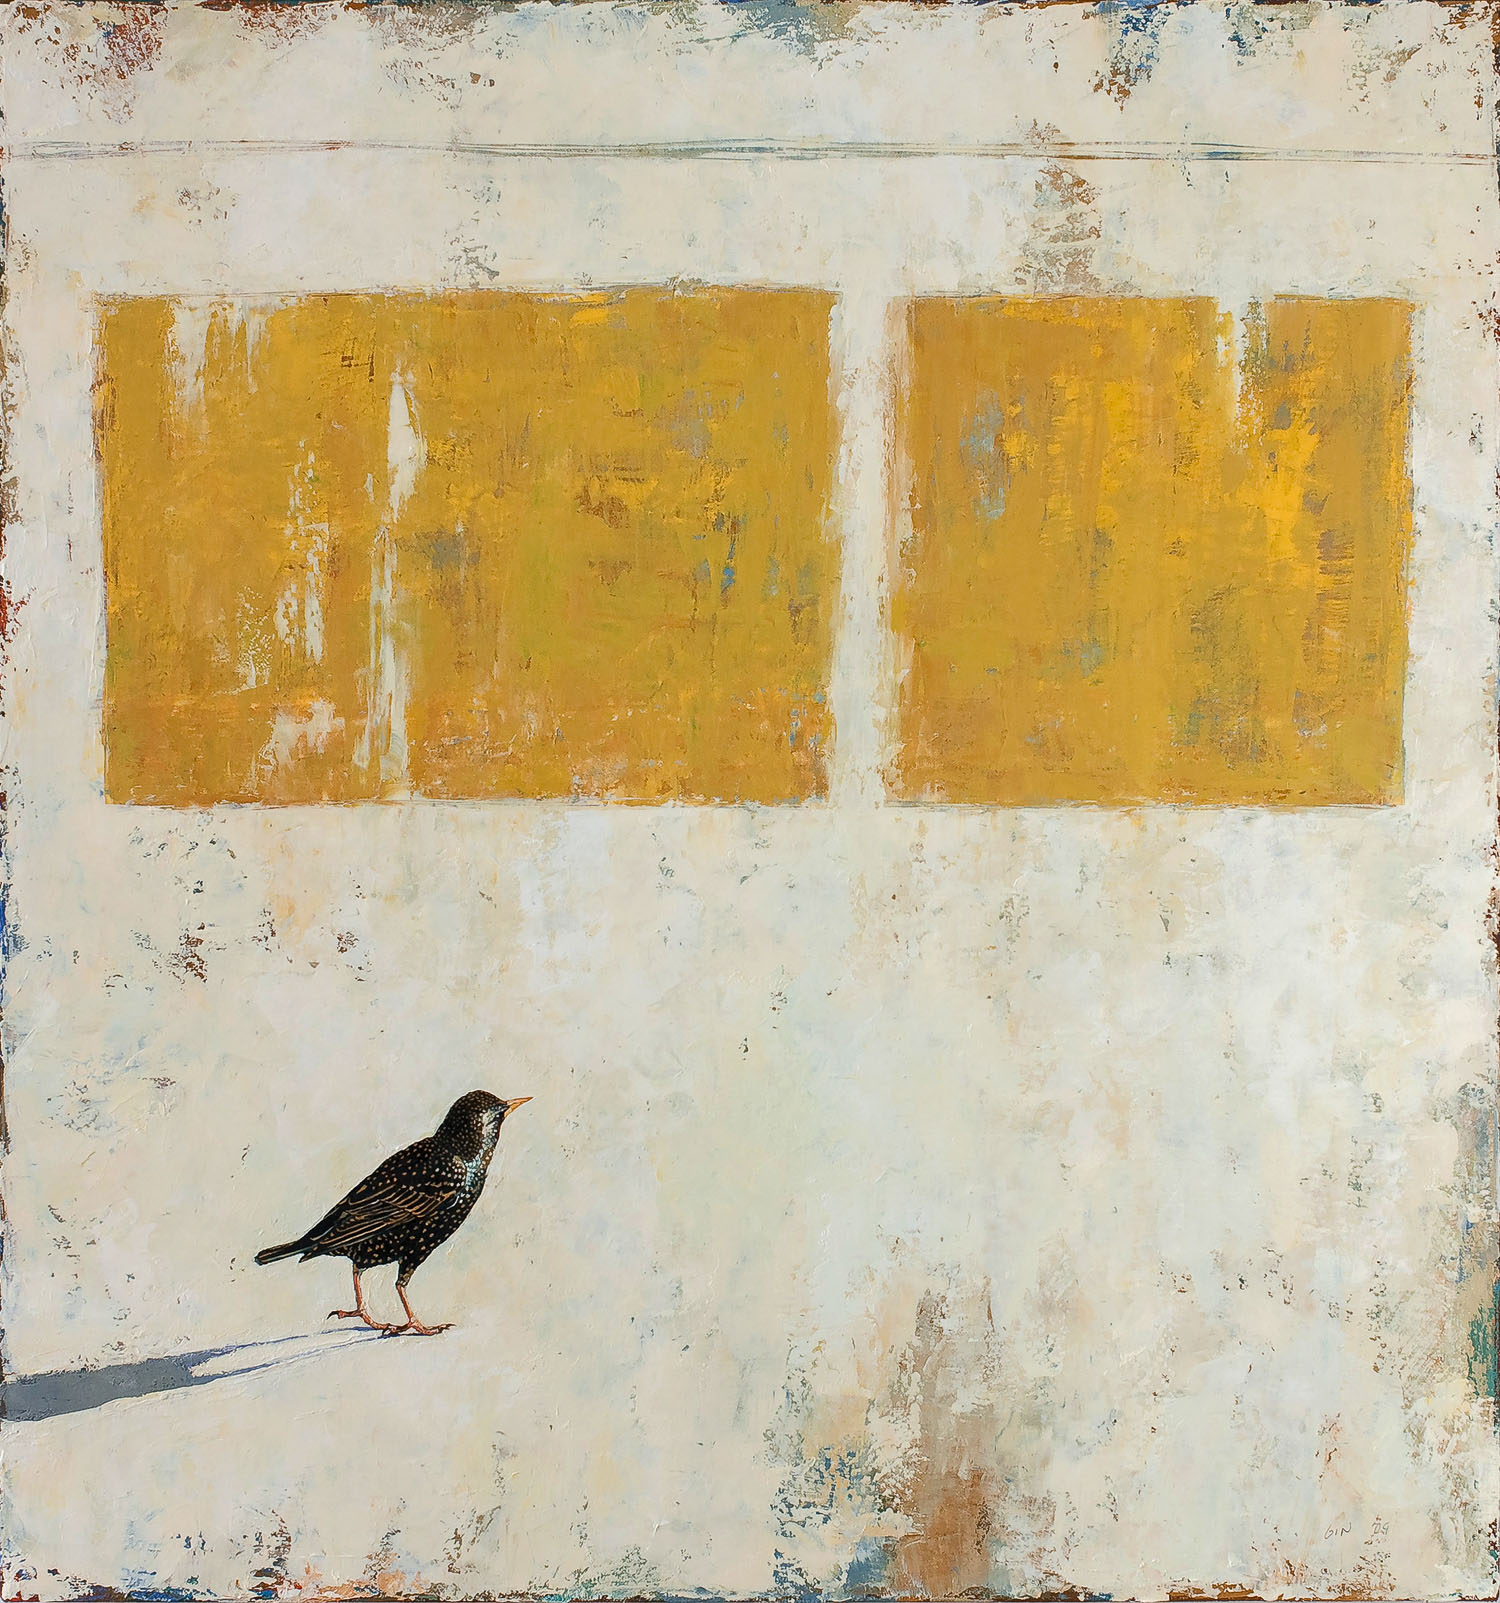   European Starling  2009 oil on canvas 36 x 34 inches  Private collection 